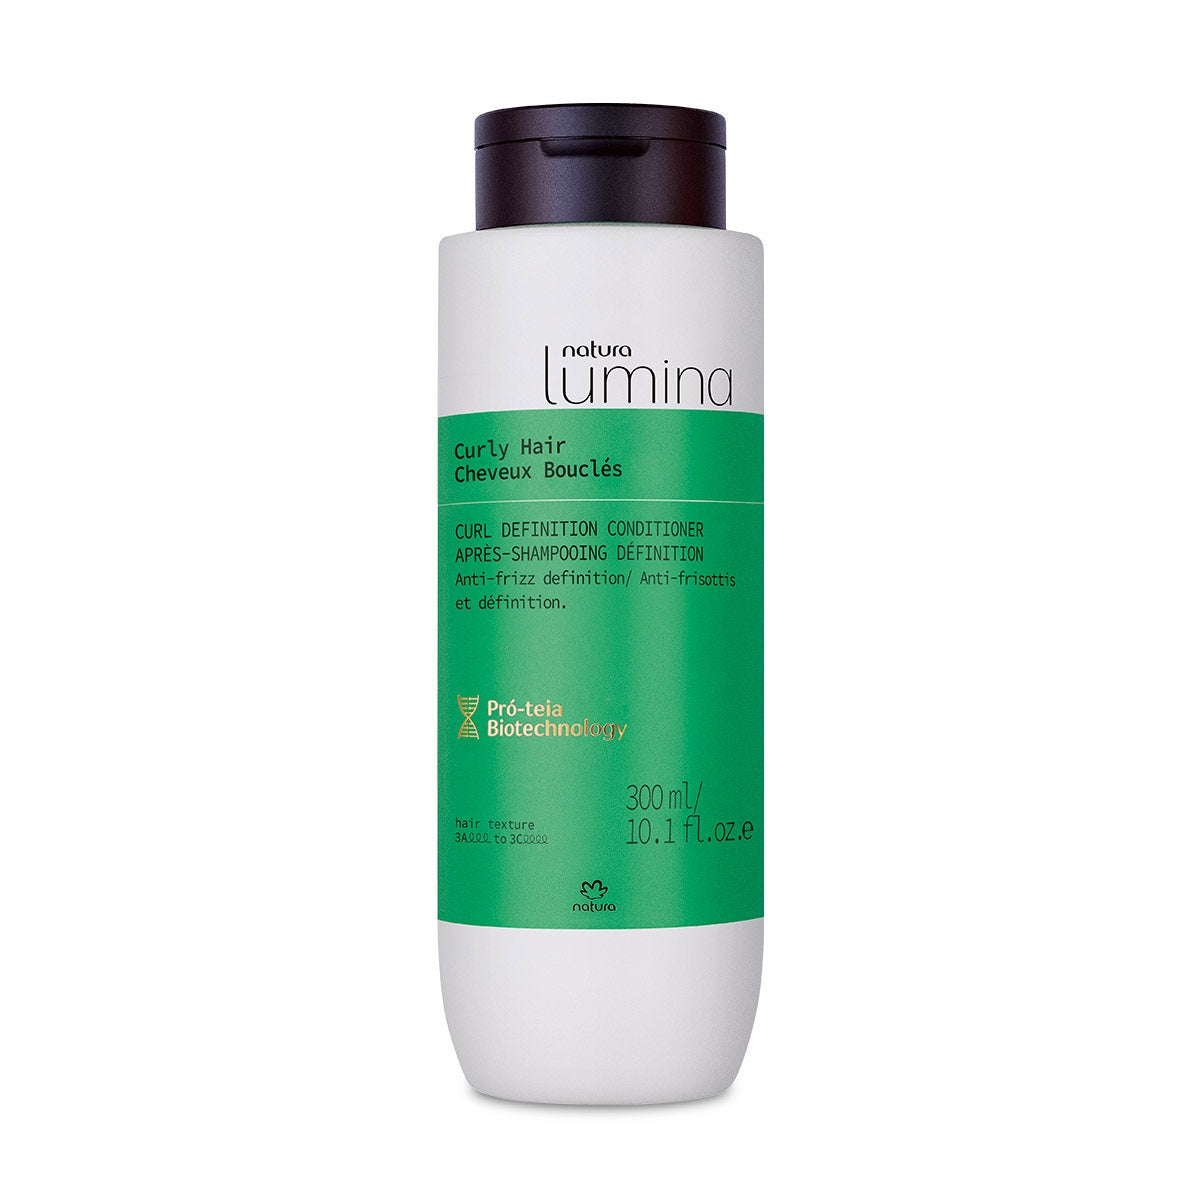 Curly Hair Curl Definition Conditioner 300ml